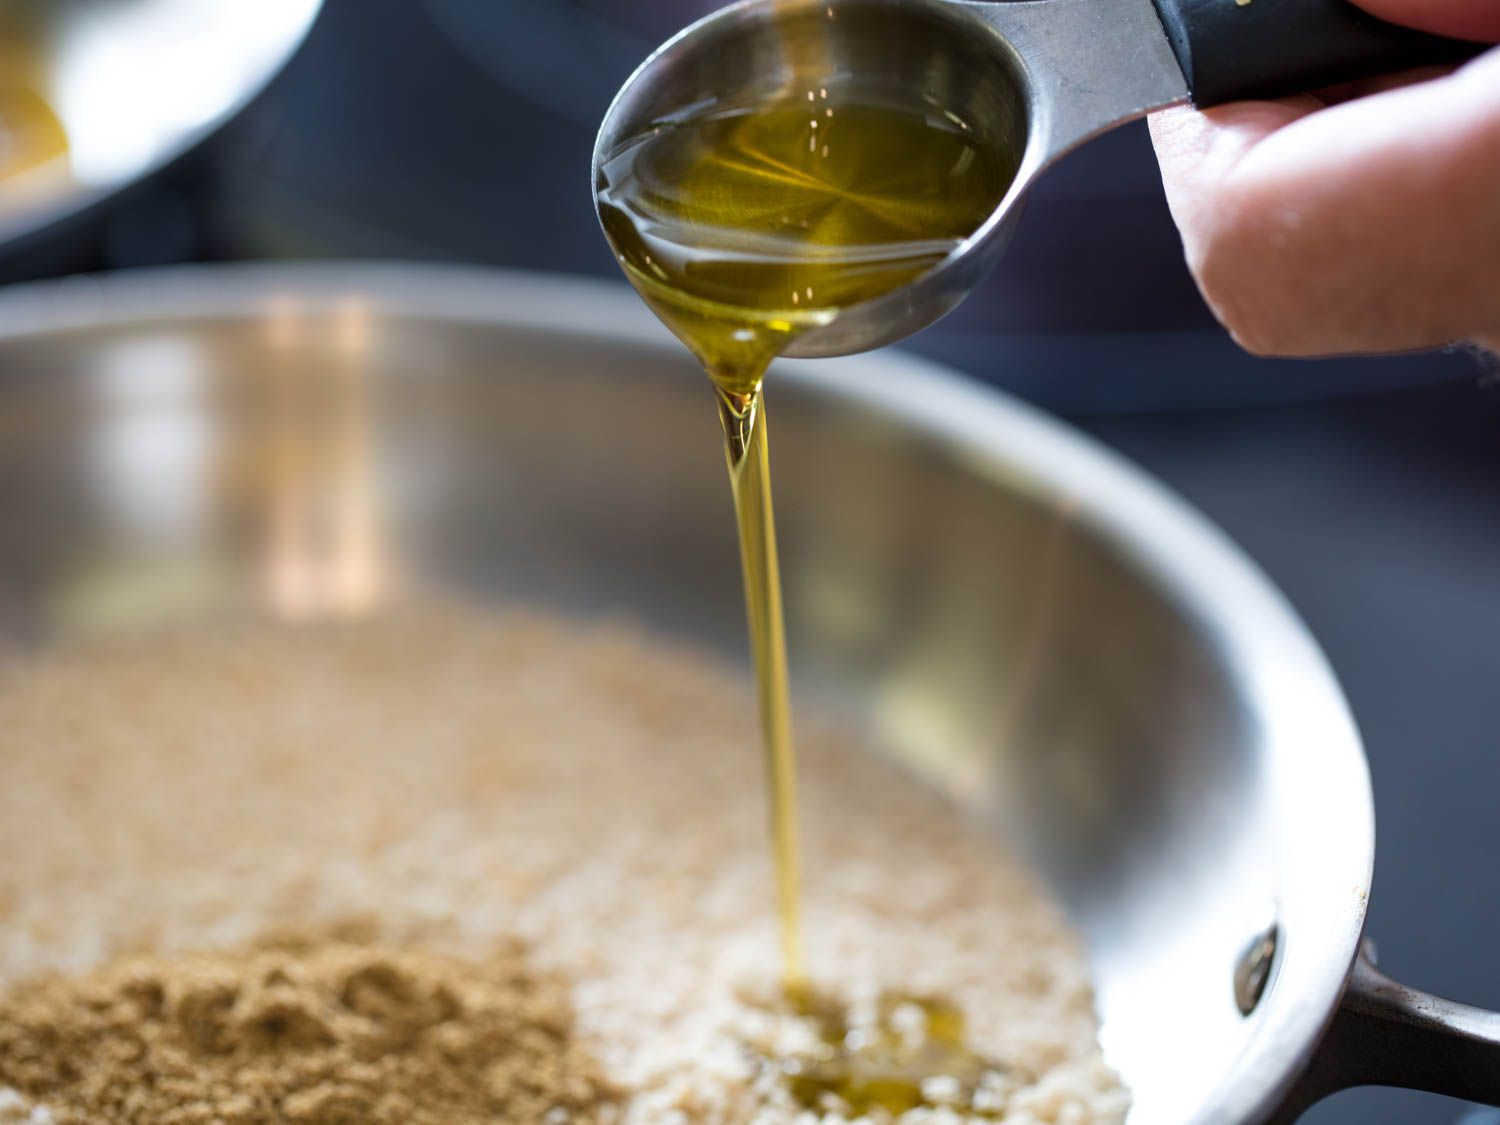 Olive oil being poured into a stainless steel skillet that holds breadcrumbs and ground fennel seeds